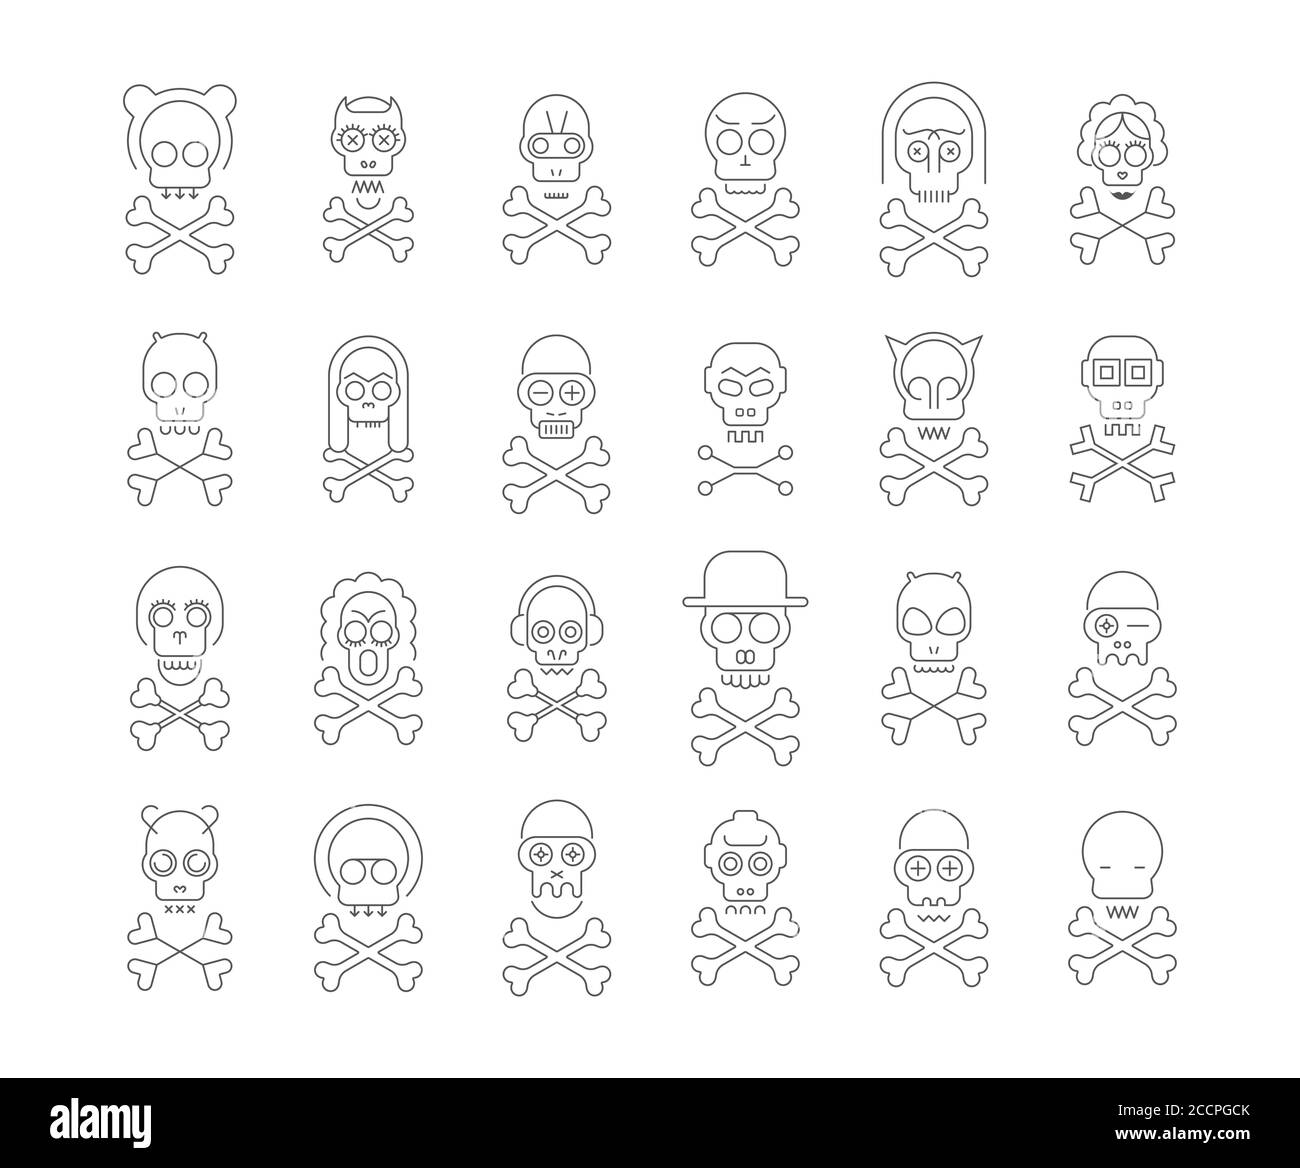 Download White Line Art Silhouettes Isolated On A Dark Grey Background Skull And Crossbones Vector Icon Set Large Bundle Of Unique Design Elements Each Icon Stock Vector Image Art Alamy